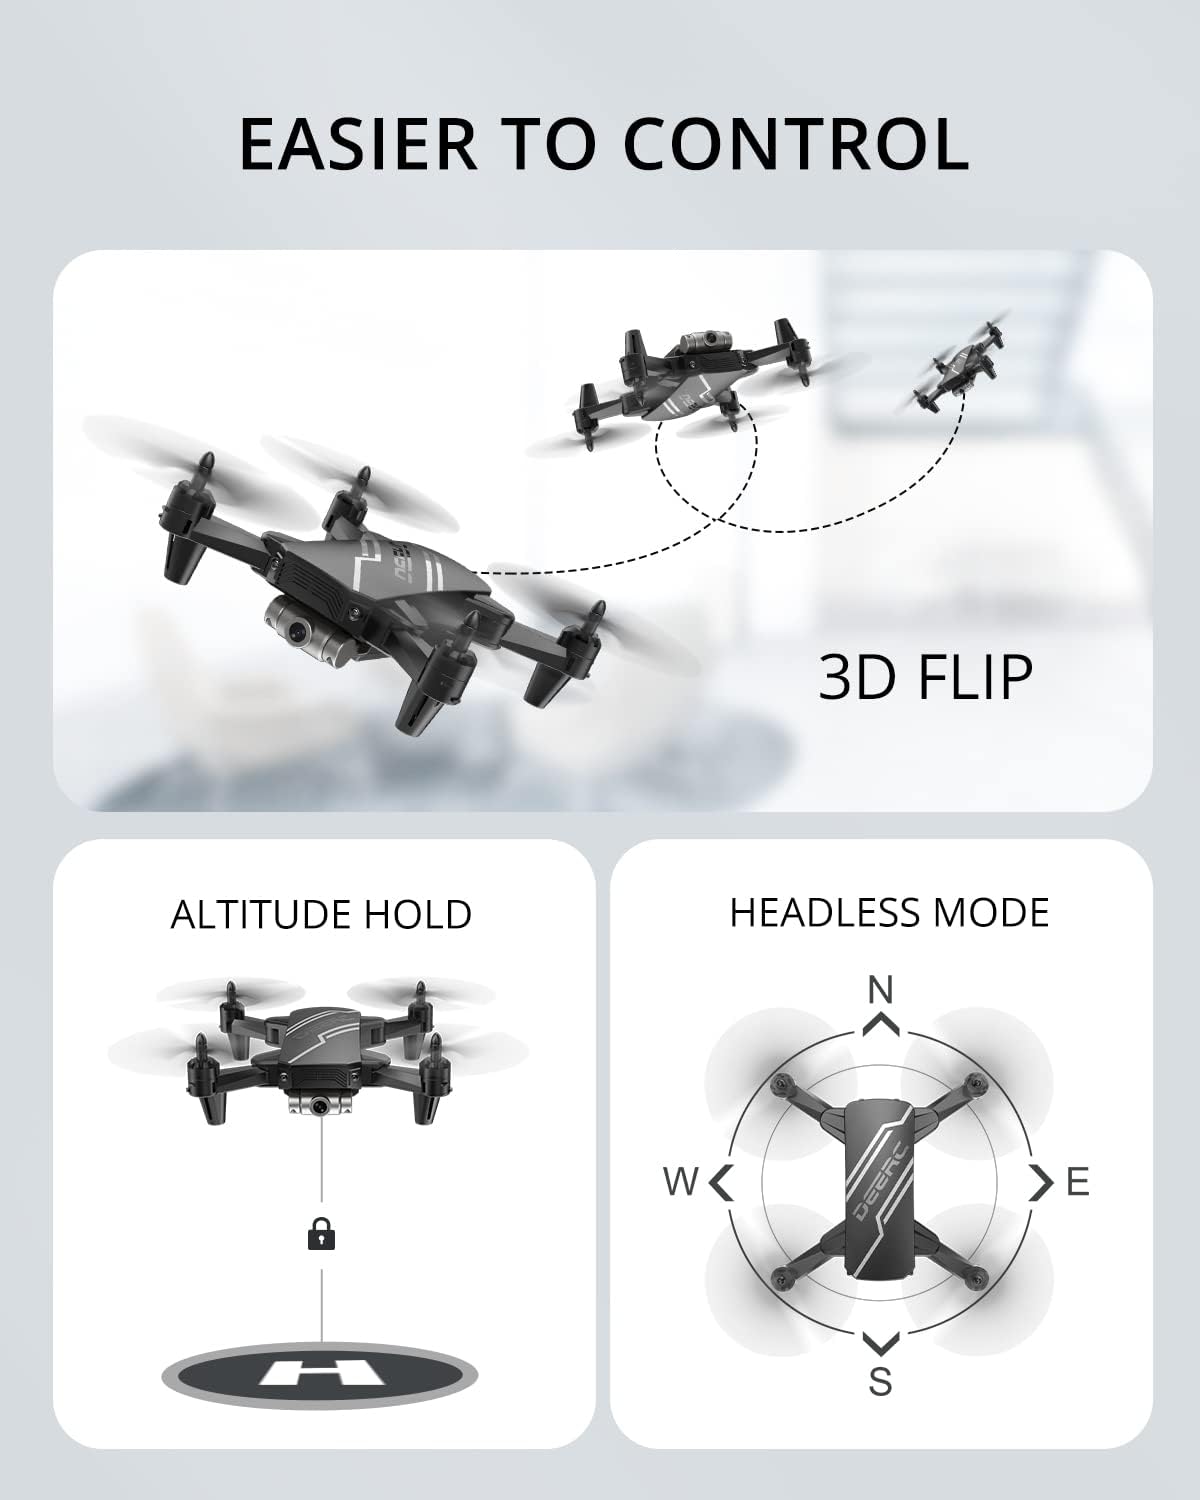 DEERC D20 Mini Drone for Kids with 720P HD FPV Camera - $45